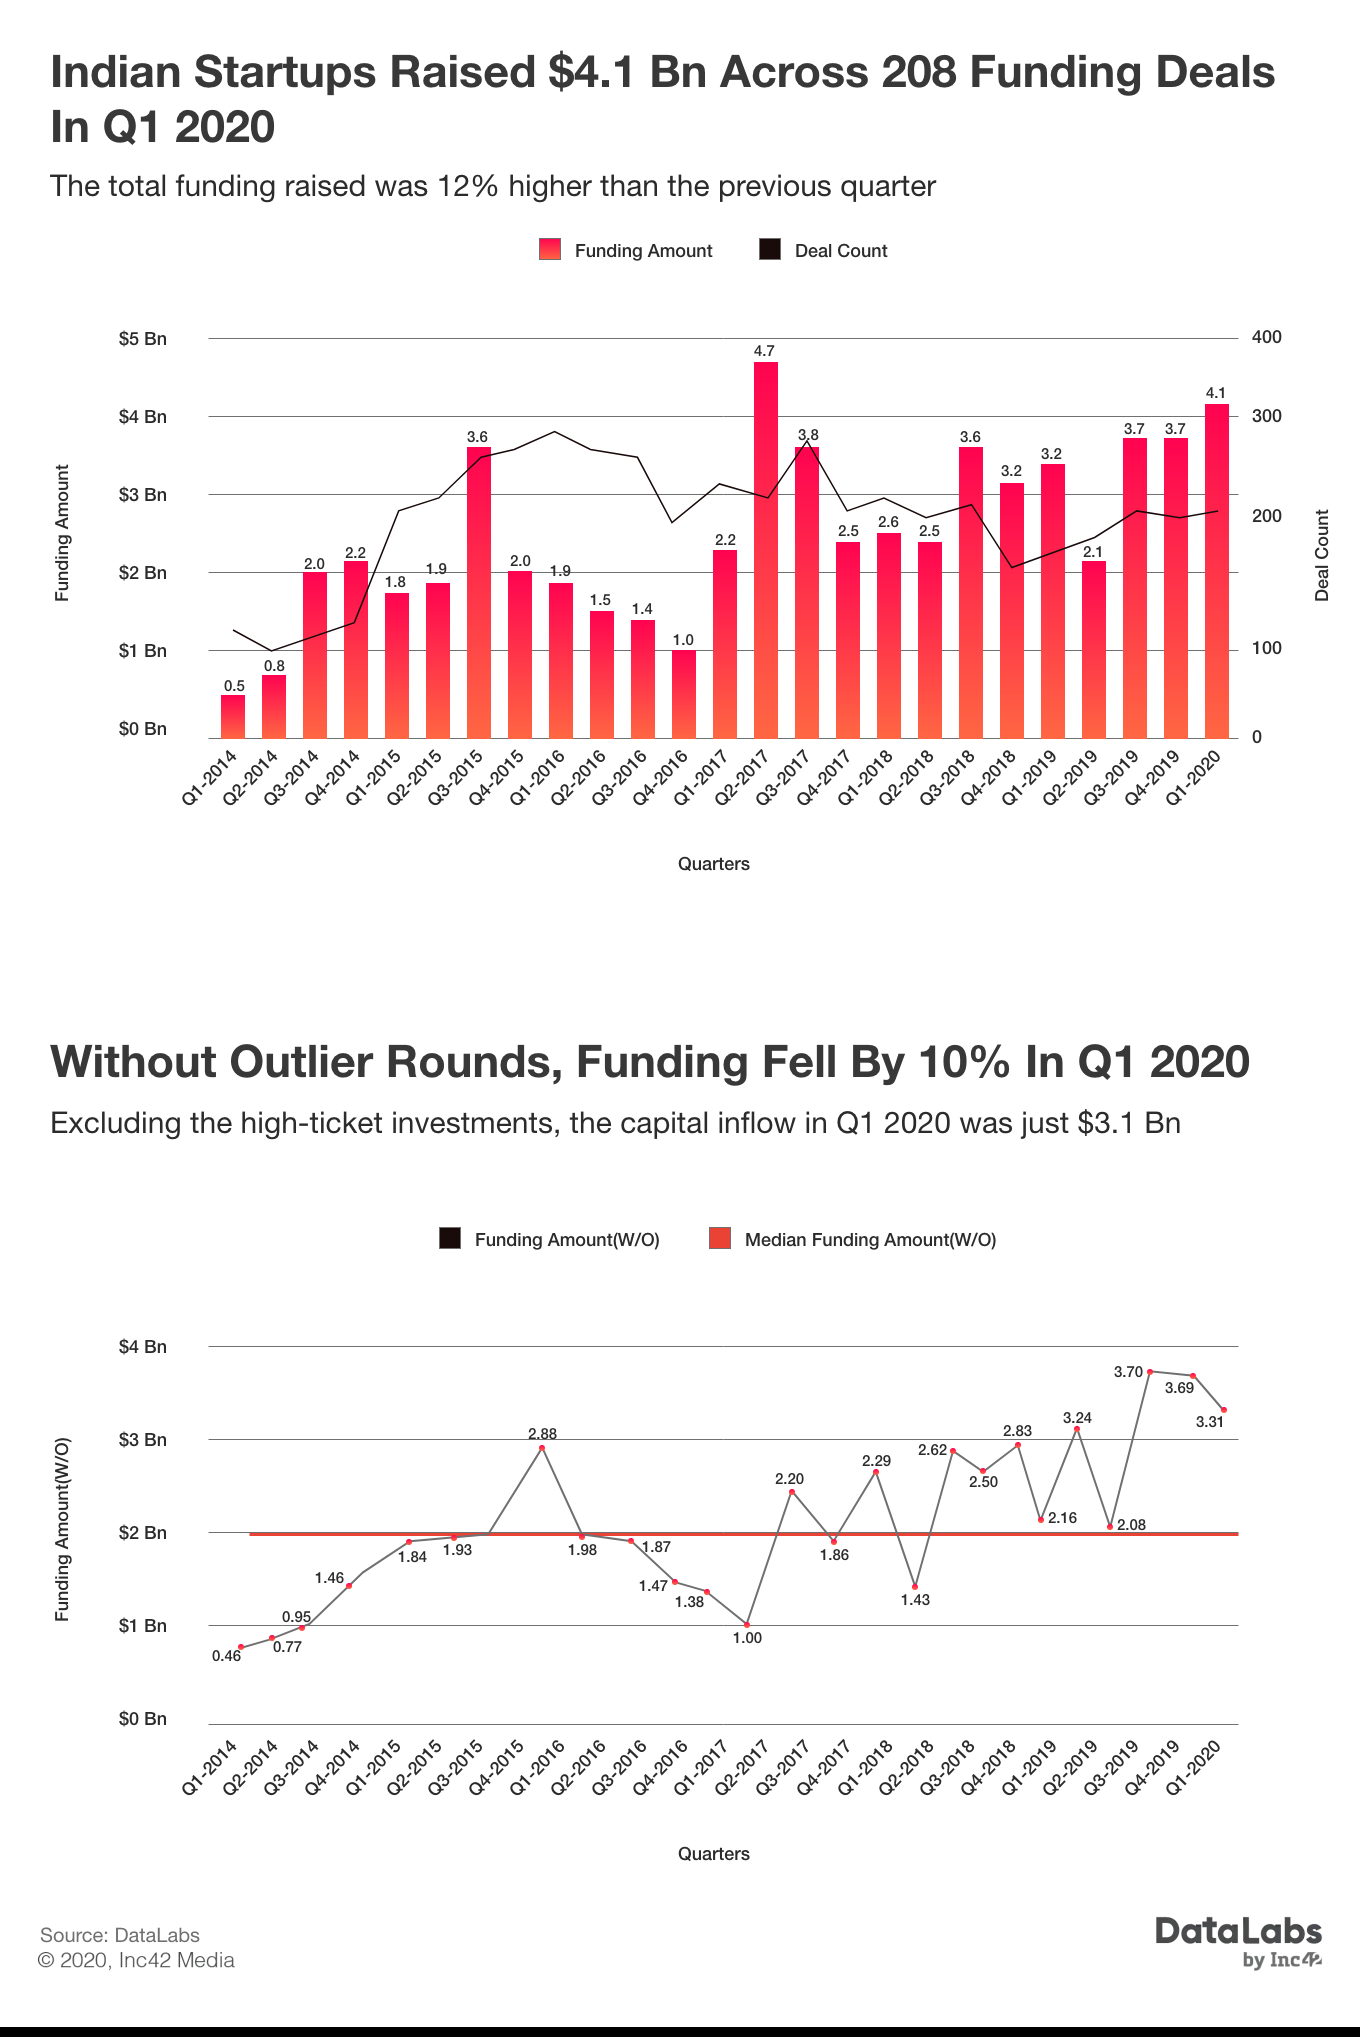 Indian startup funding in Q1 2020